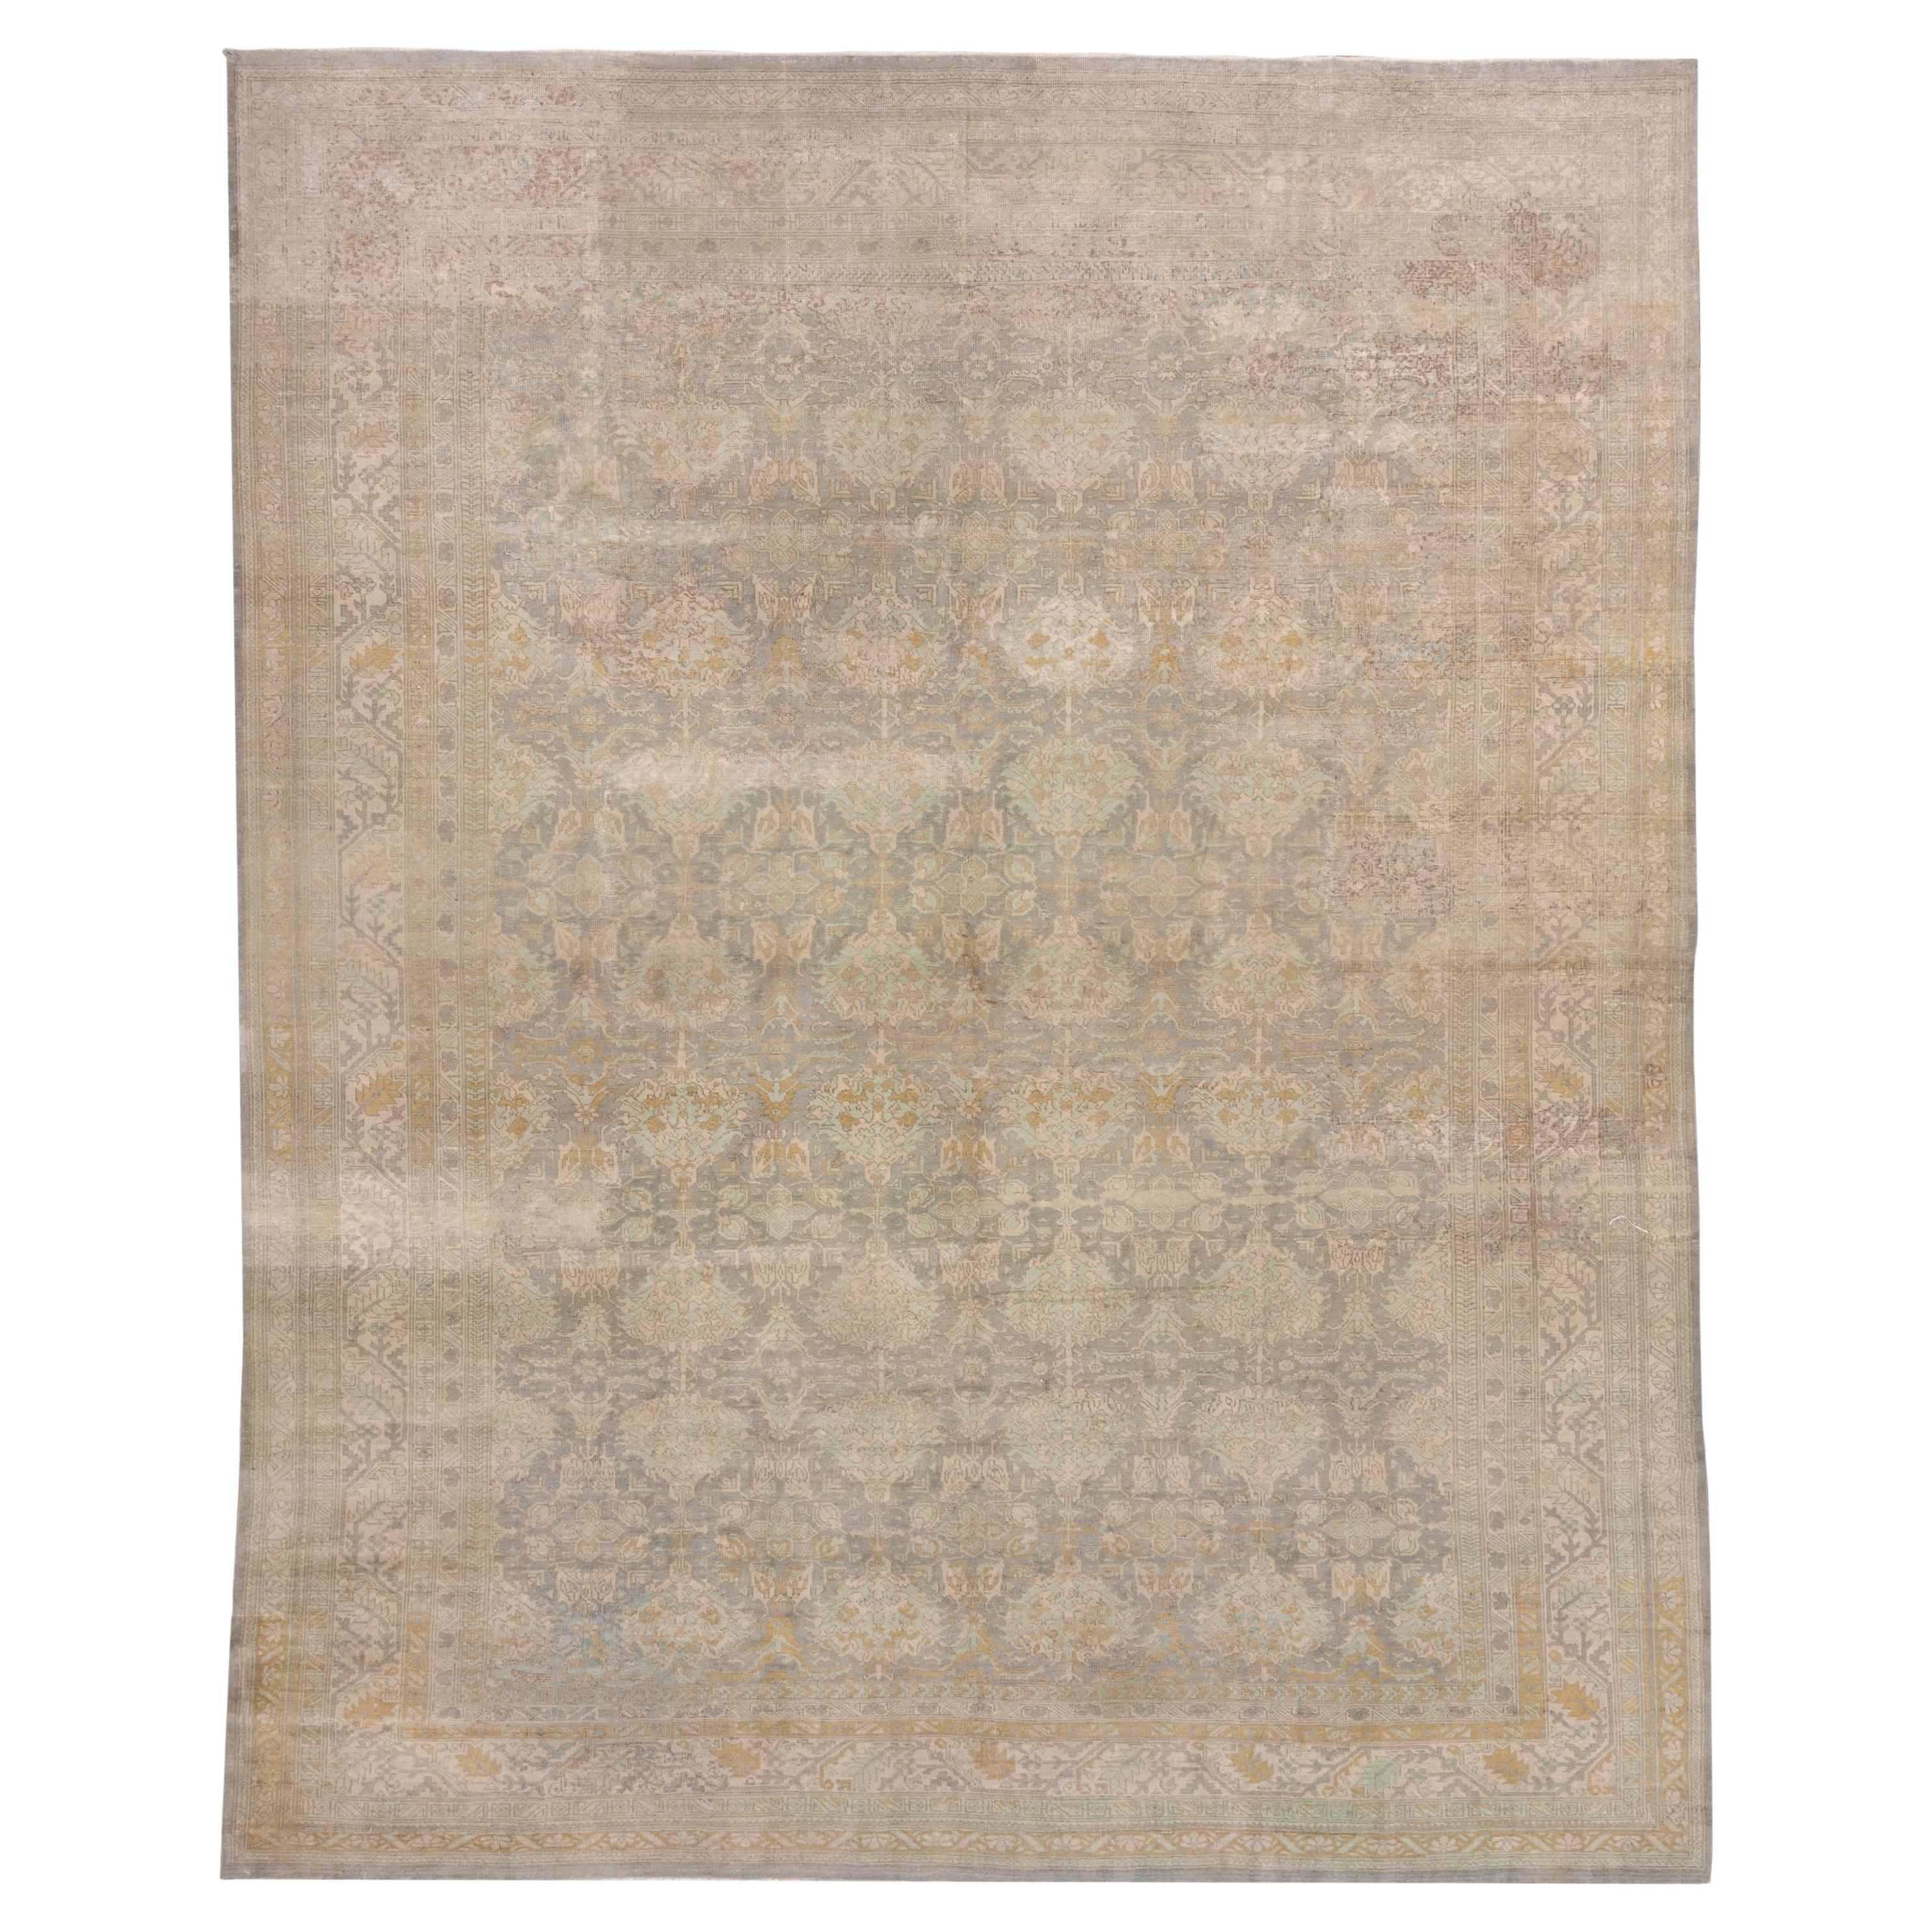 Room Sized Antique Oushak Rug, Gray & Seafoam Allover Field, Lightly Distressed For Sale